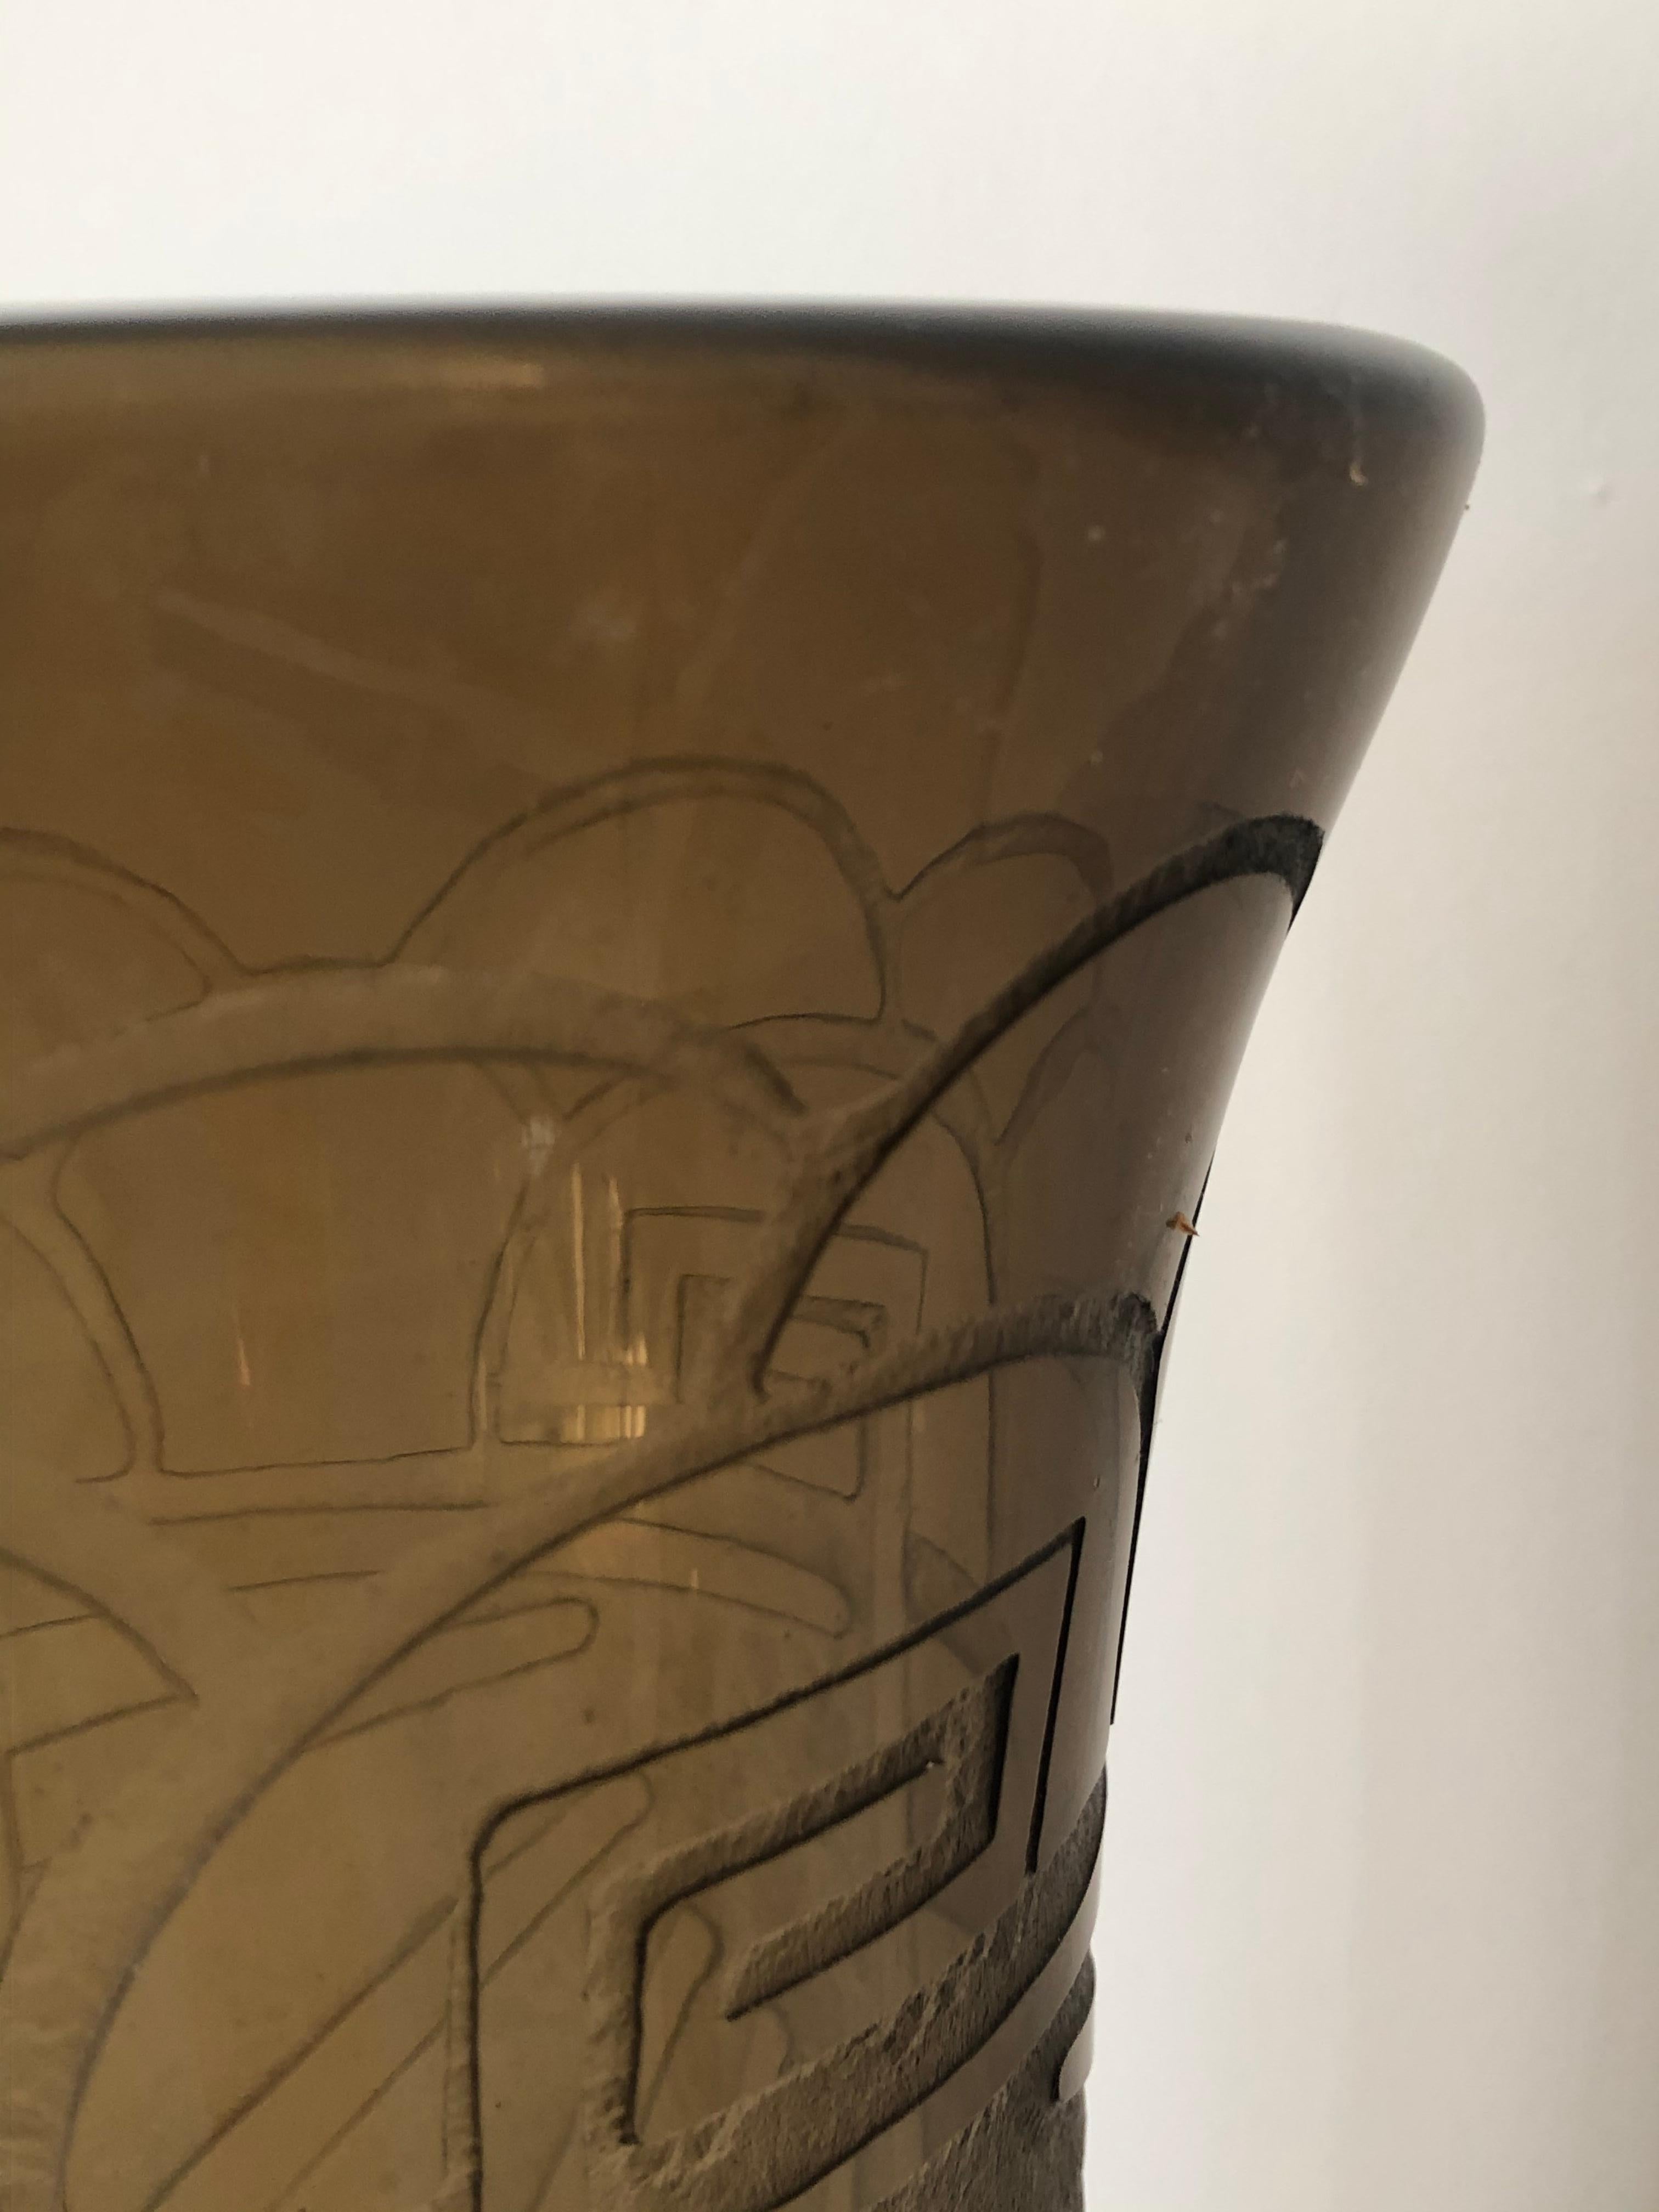 Art Deco Massive Tall Schneider Wheel Cut Engraved Acid Etched Vase In Excellent Condition For Sale In Westport, CT